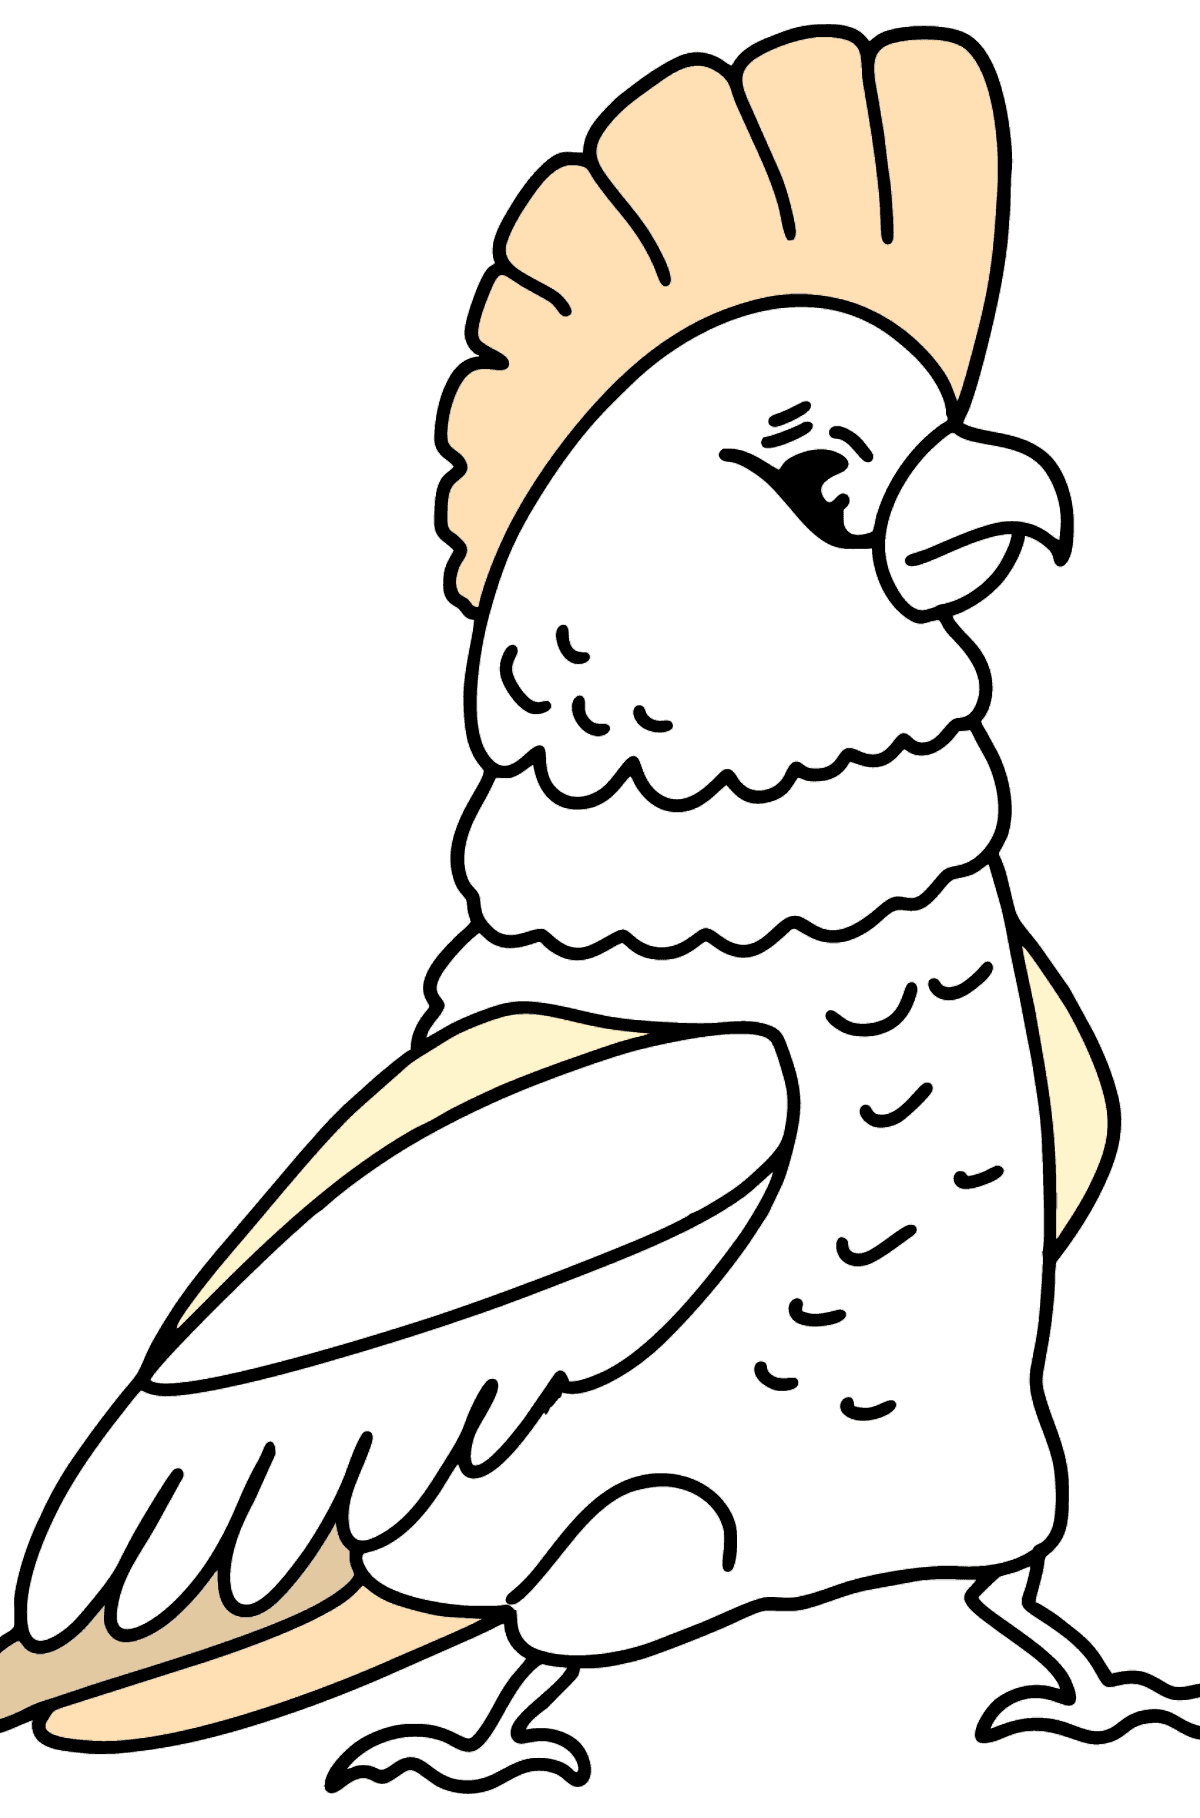 Cockatoo coloring page - Coloring Pages for Kids